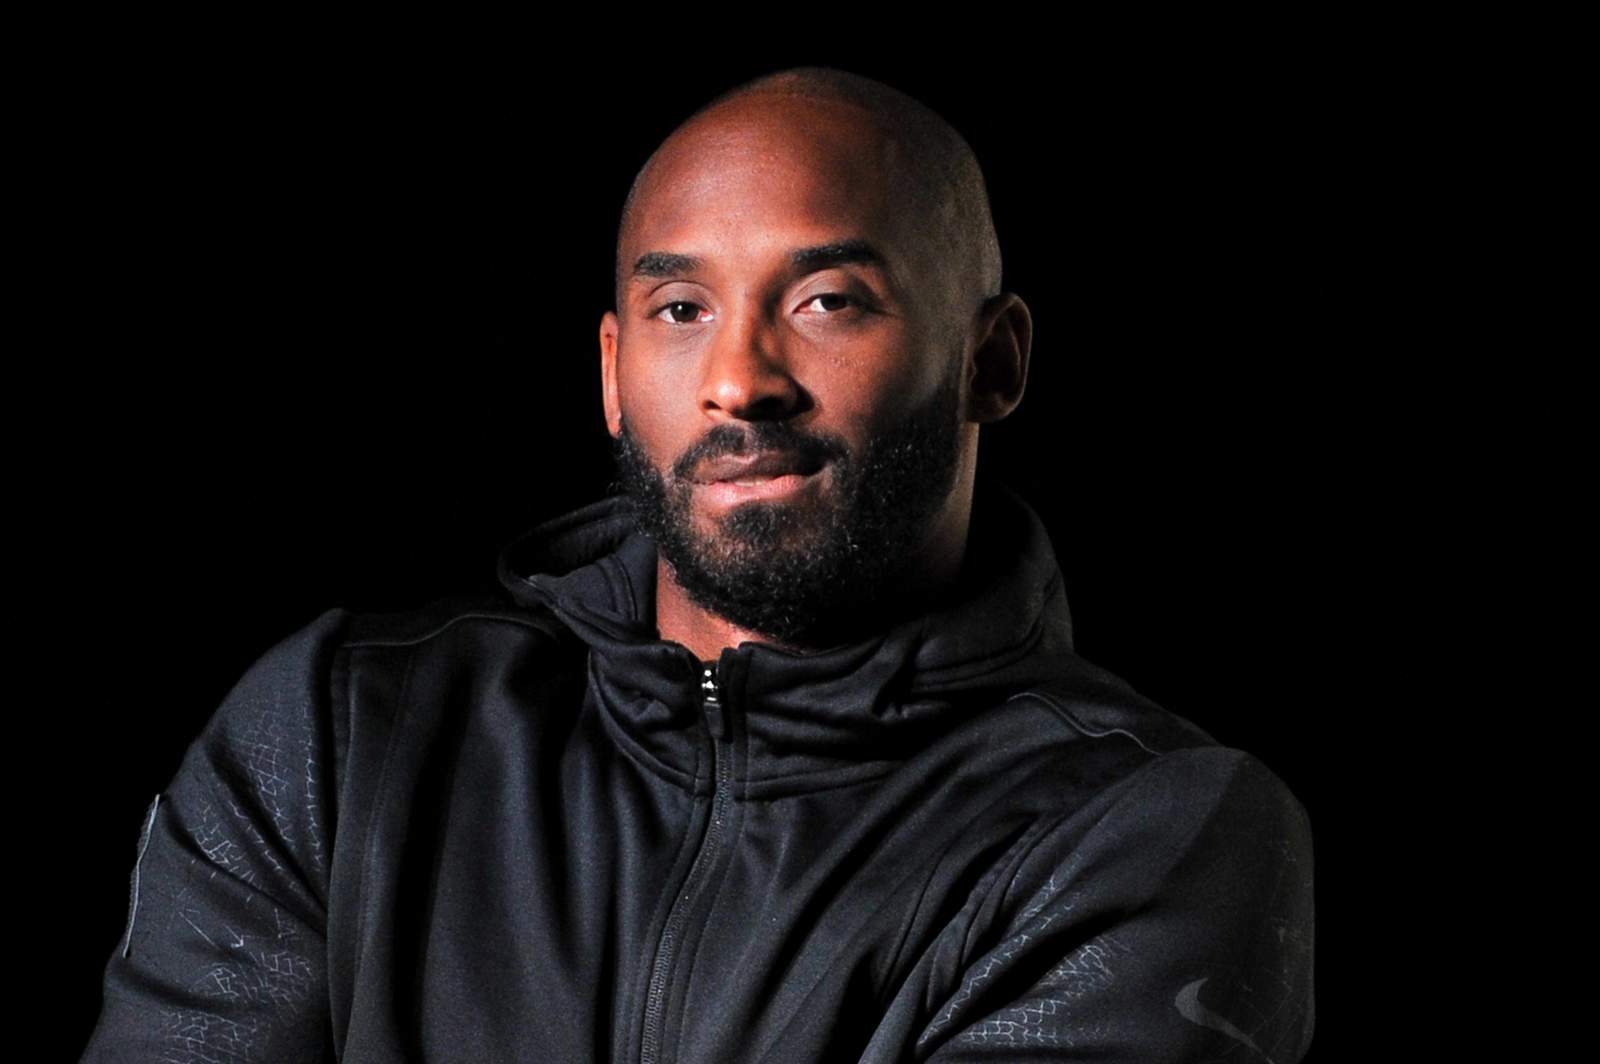 Kobe Bryant paid tribute to MLK on Instagram just days before his death